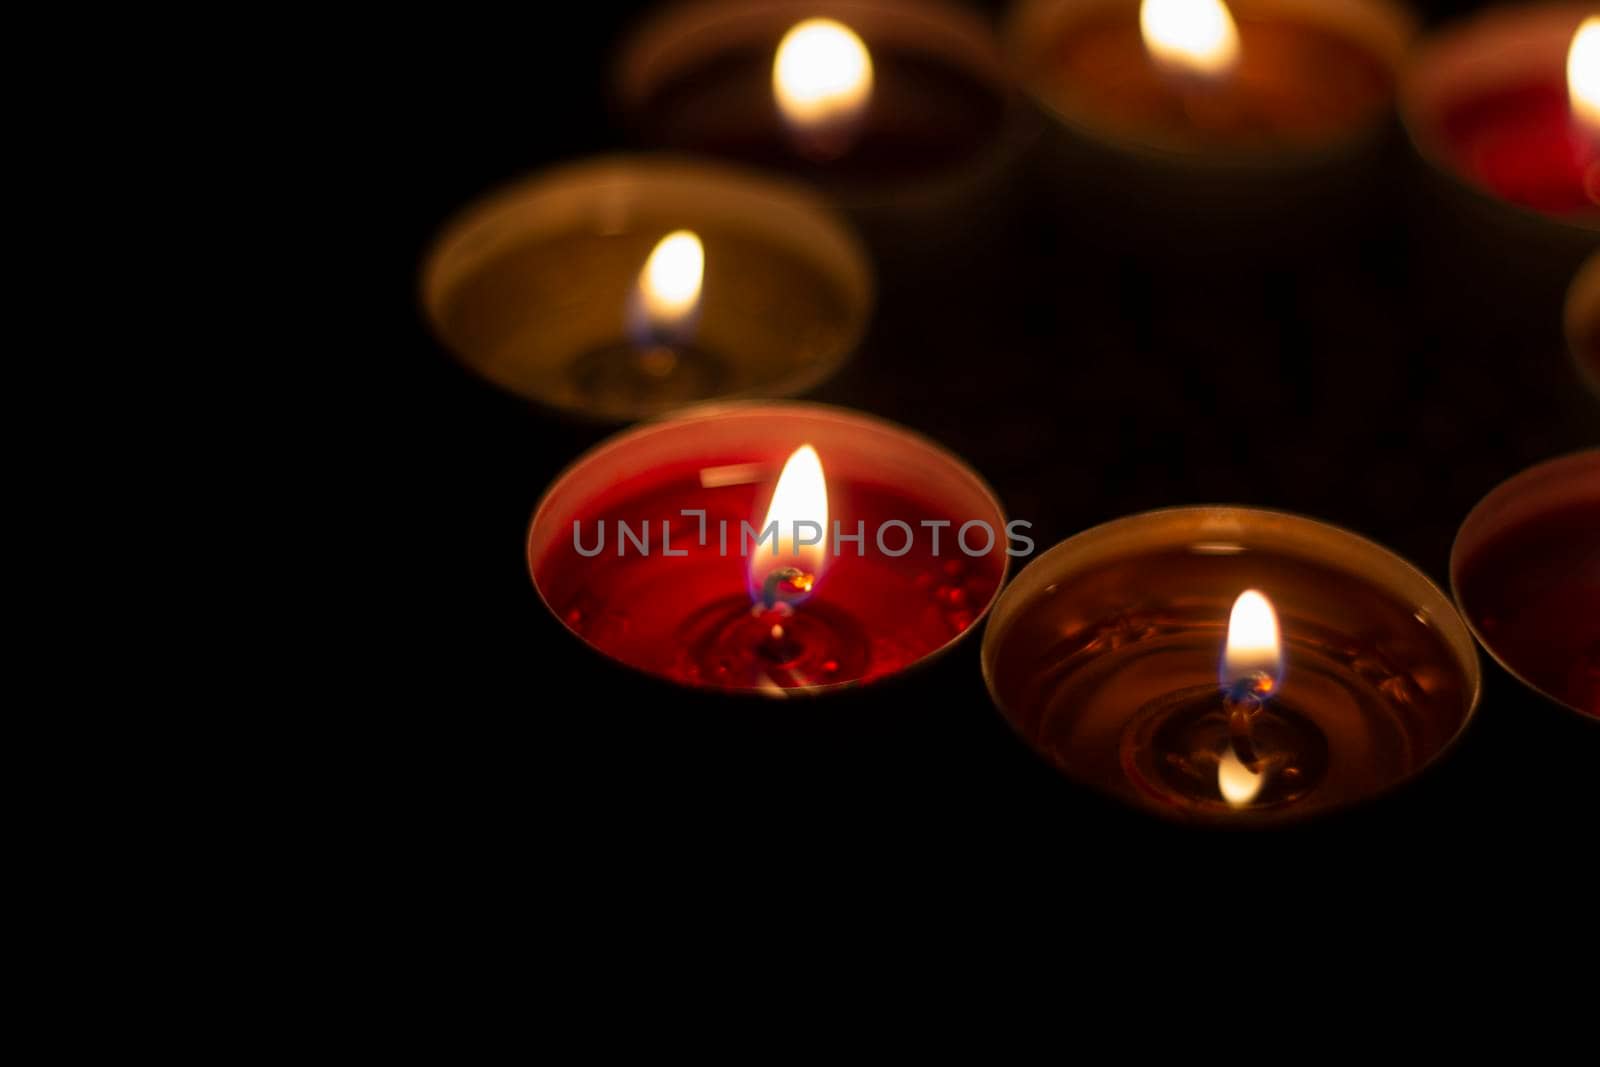 Round candles burn in dark. Wax candles on dark background. Red and yellow lights. Details of candlelit dinner.